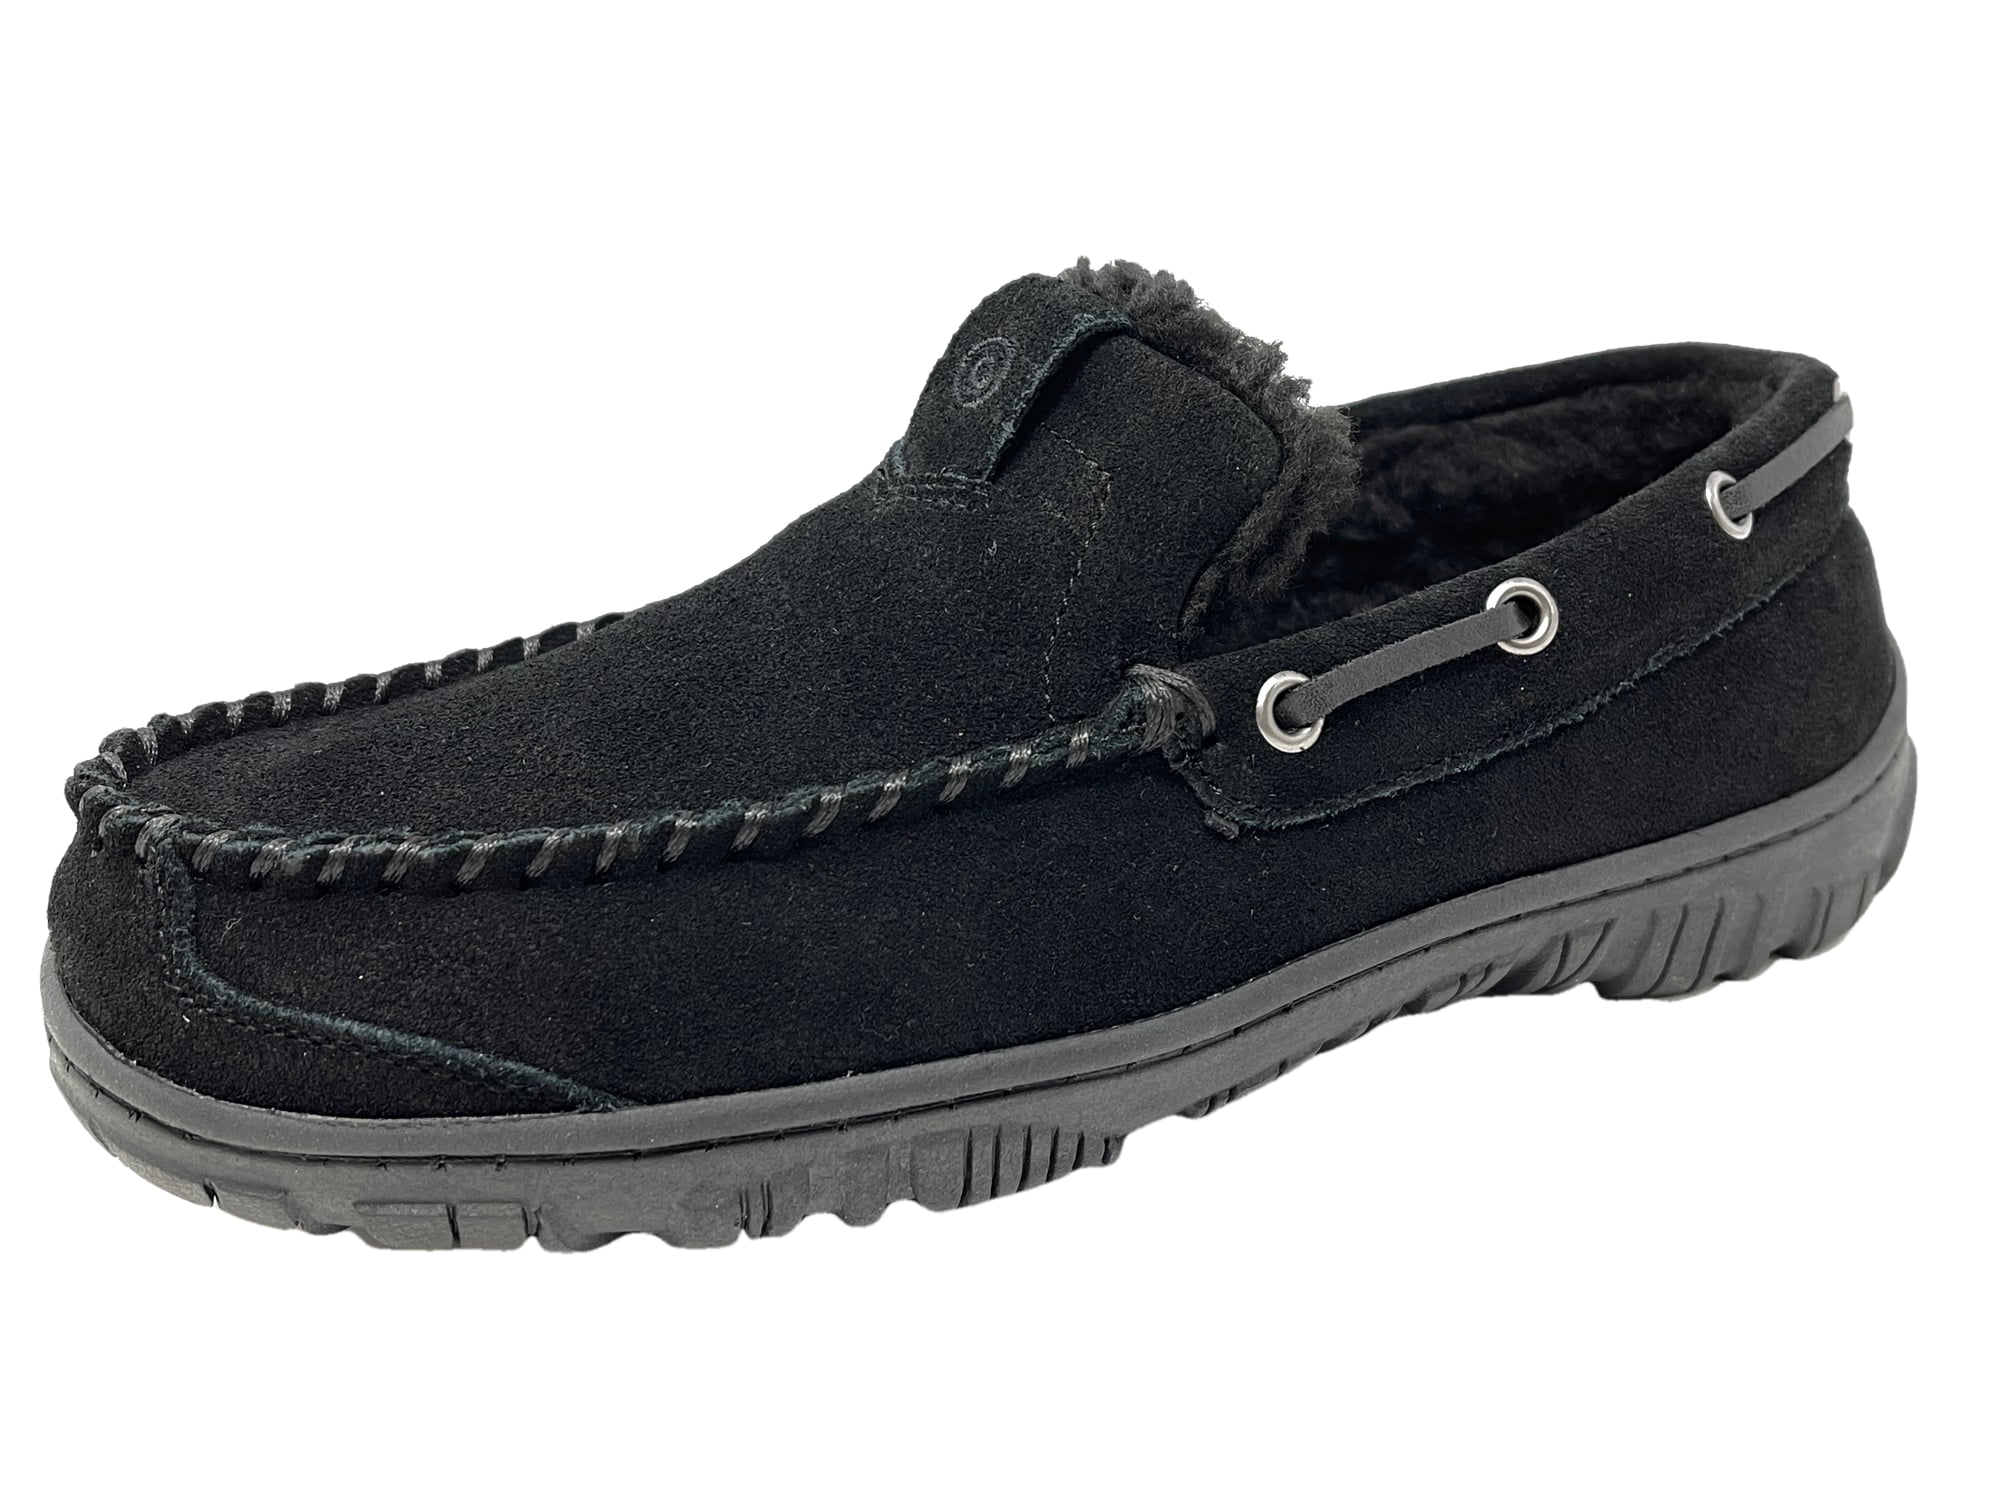 Understand and buy > clarks relaxed style mens slippers > disponibile